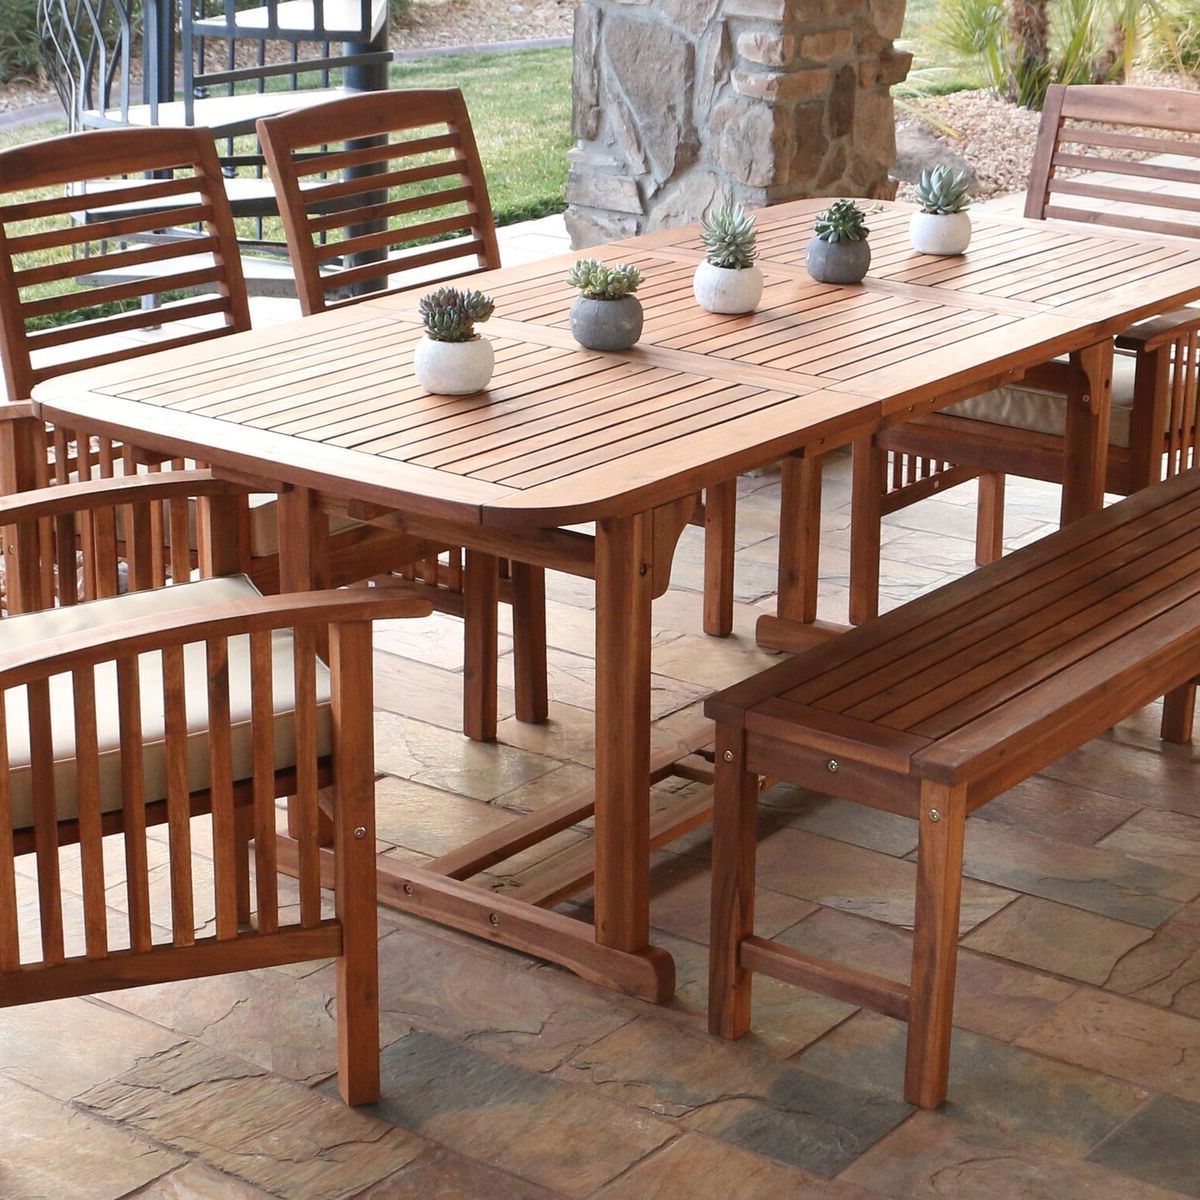 Outdoor  Dining Table, Patio Dining Table, Patio Dining Inside Latest Acacia Wood Outdoor Tables (View 15 of 15)